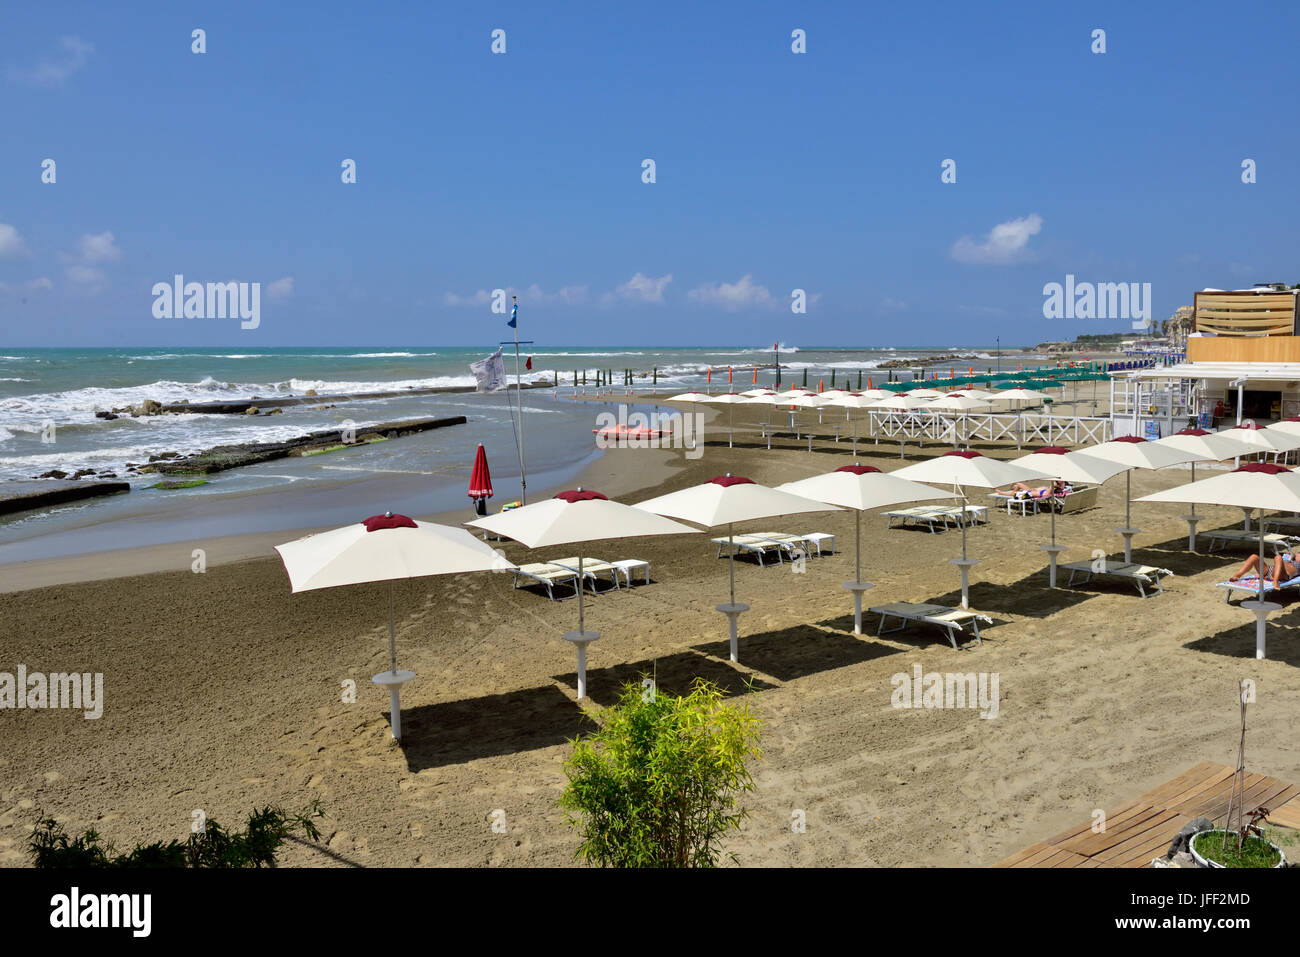 Nearly deserted beach with umbrellas out on a windy summer day in Anzio, Italy Stock Photo